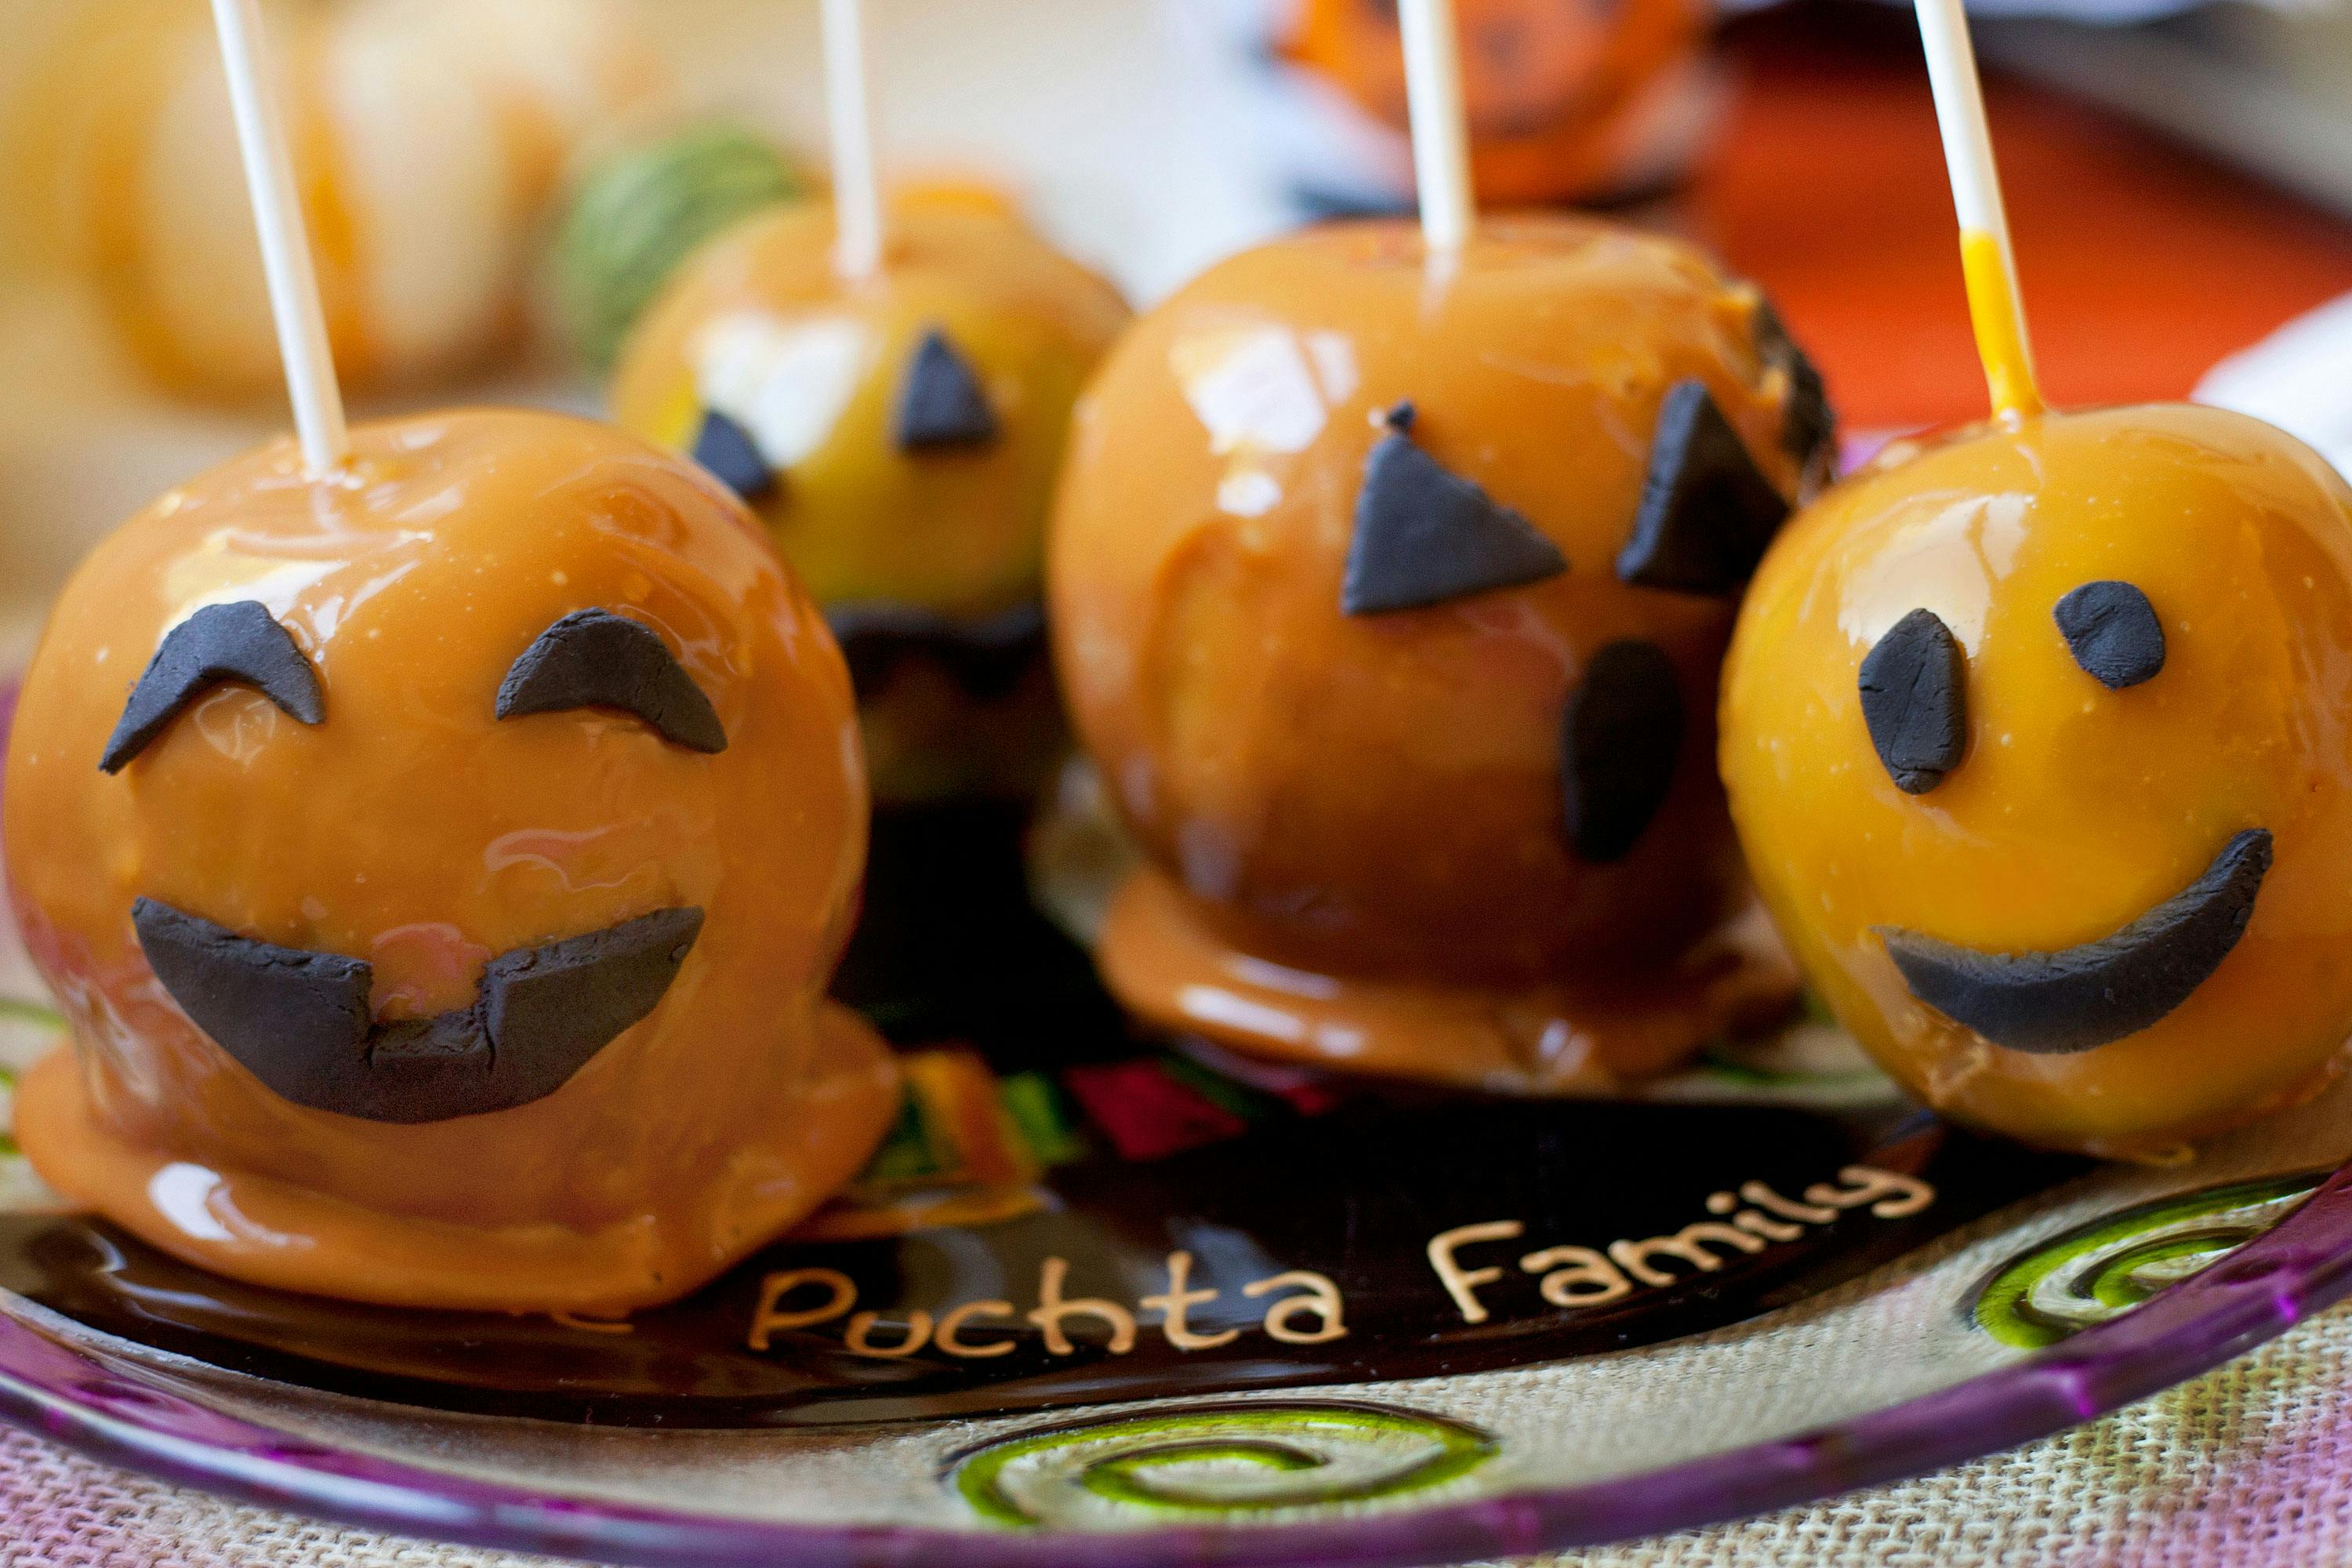 Caramel apples are among the best halloween edibles. Here, apples decorated like jack-o-lanterns are shown